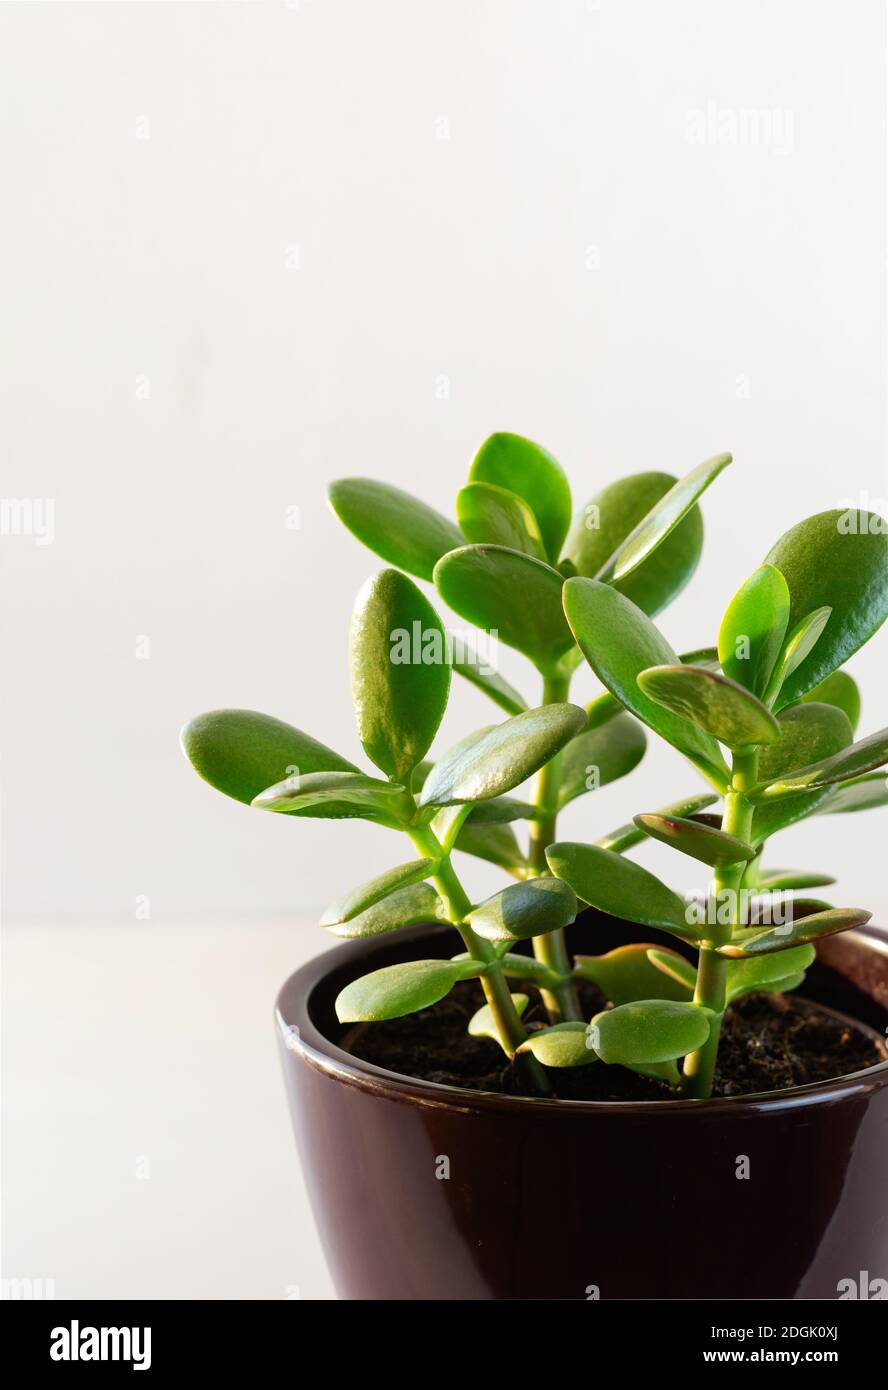 Houseplant Crassula ovata in a ceramic pot . Money Tree plant for home. Indoor plant. Vertical crop. Copy space. Stock Photo